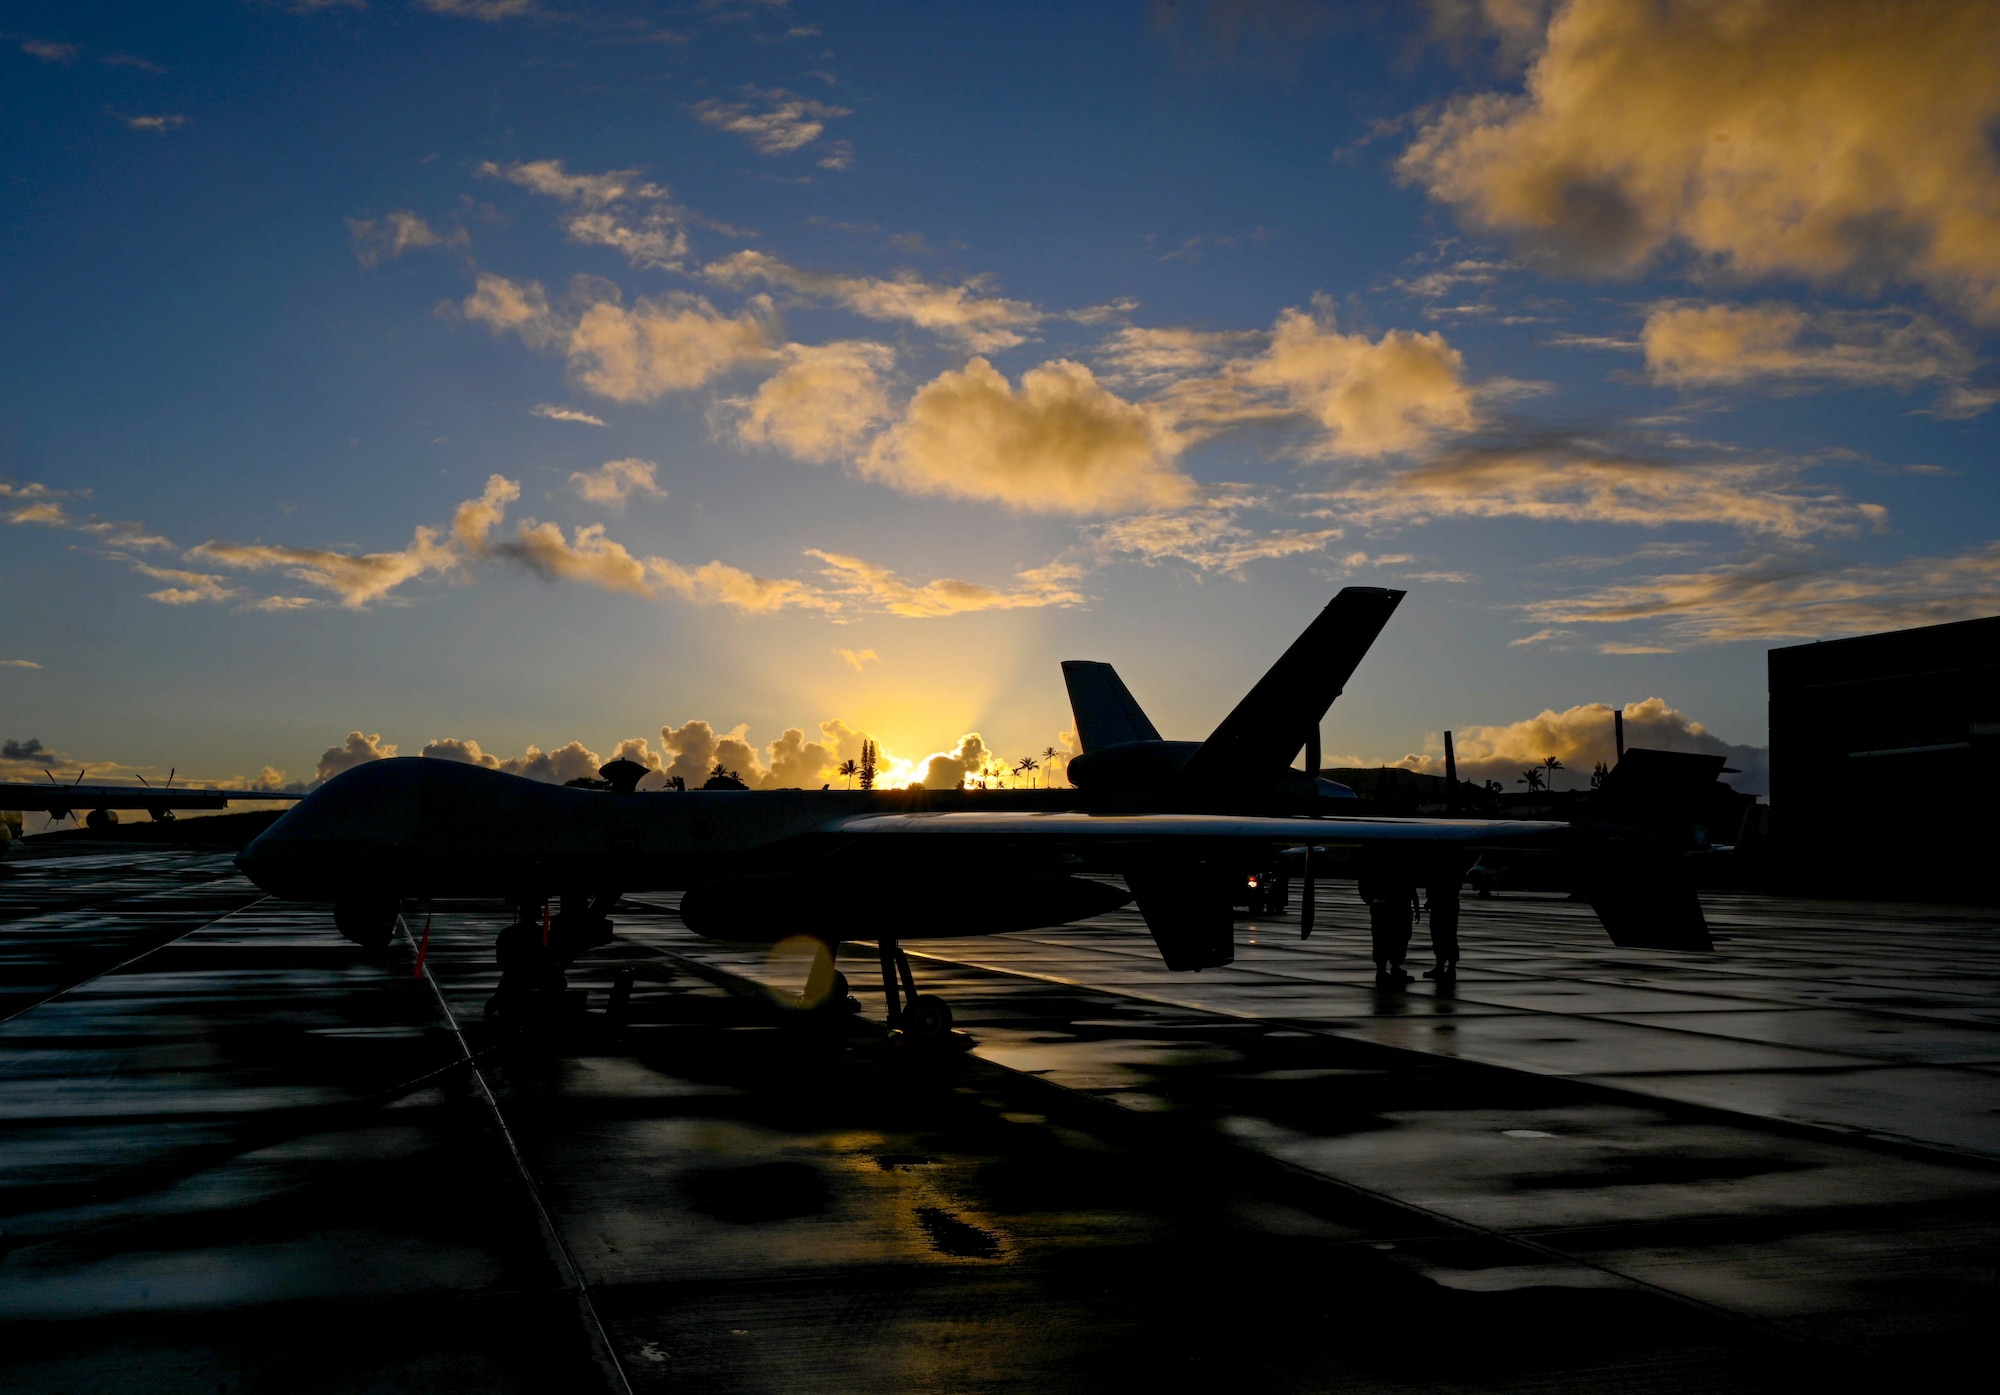 MARINE CORPS BASE HAWAII, Hawaii (July 25, 2022) An MQ-9 Reaper assigned to the 49th Wing at Holloman Air Force Base, N.M., sits on the taxi way prior to takeoff during Rim of the Pacific (RIMPAC) 2022, July 25.